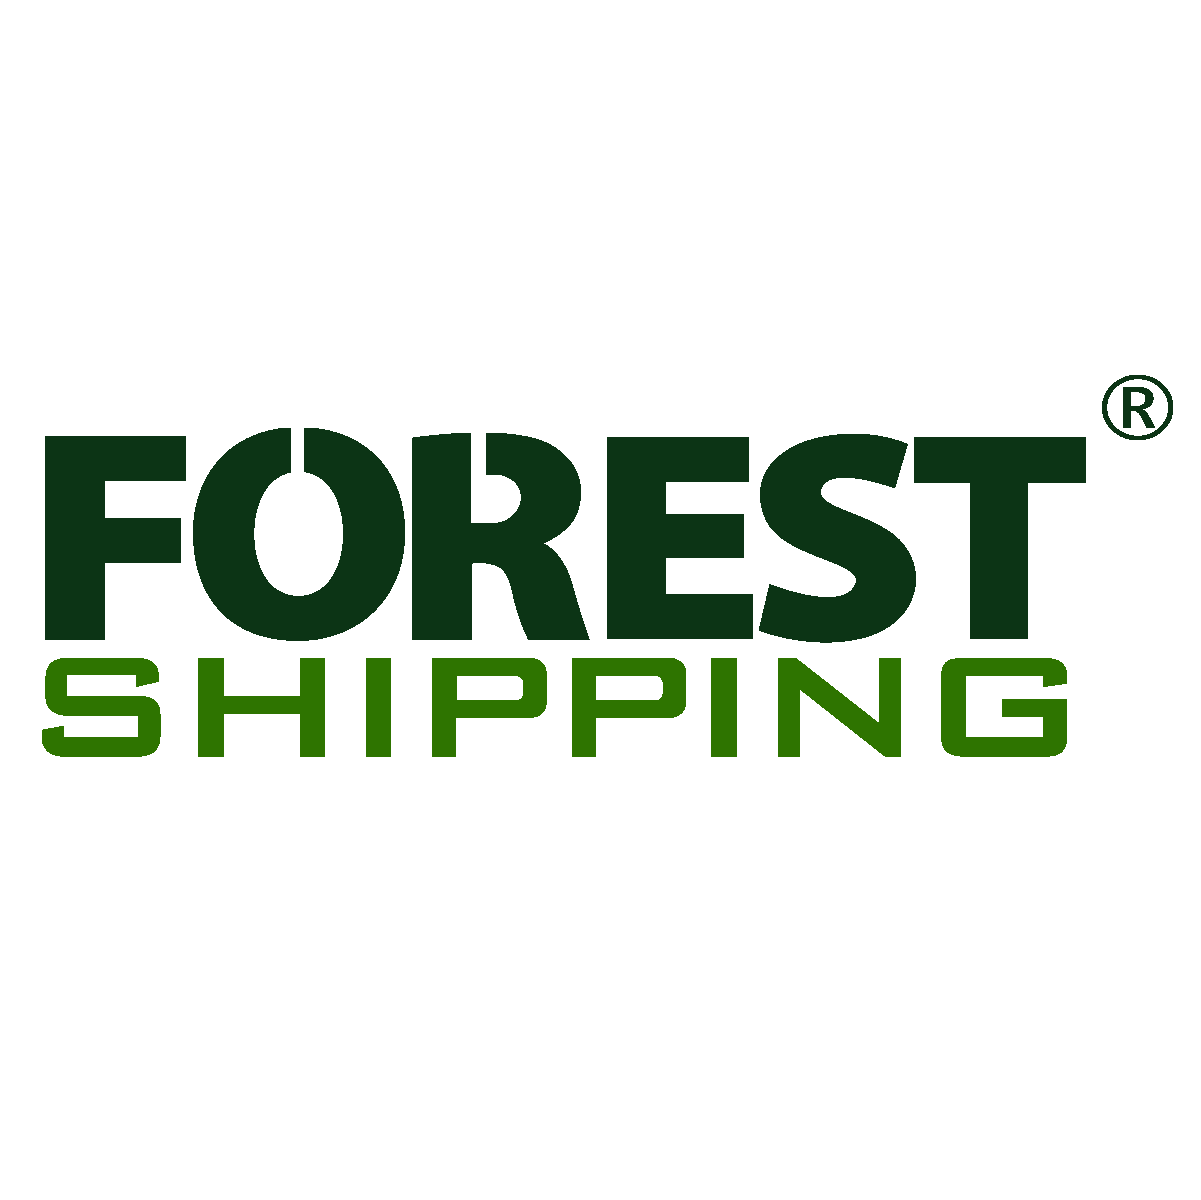 (c) Forestshipping.com